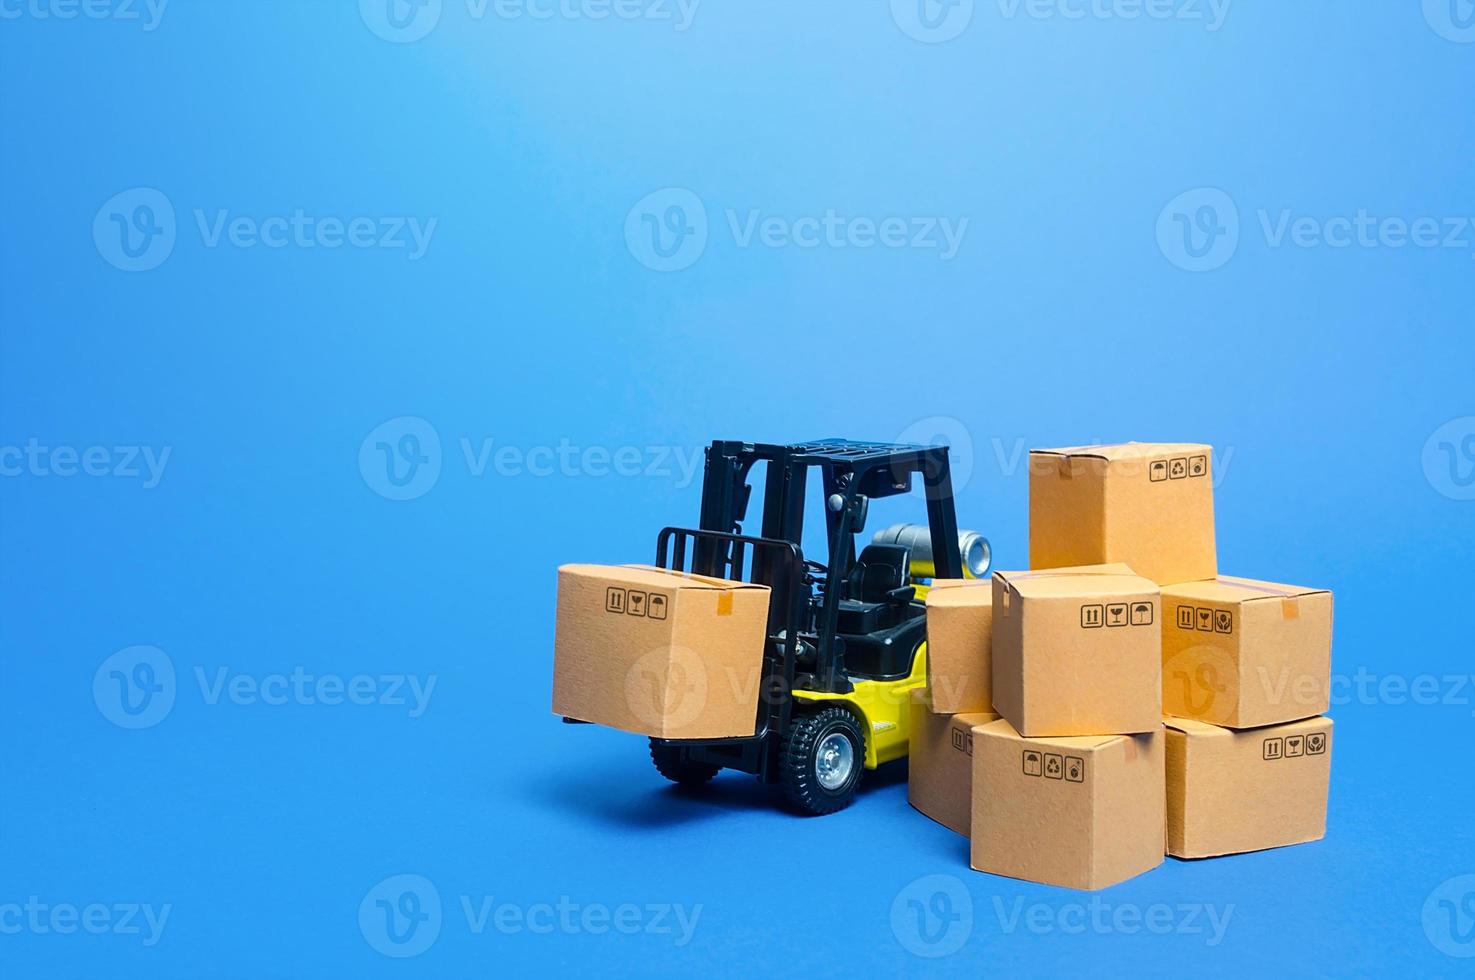 Forklift truck with cardboard boxes. Transportation logistics infrastructure, import and export goods and products delivery. Production, transport, cargo storage. Freight shipping. retail photo